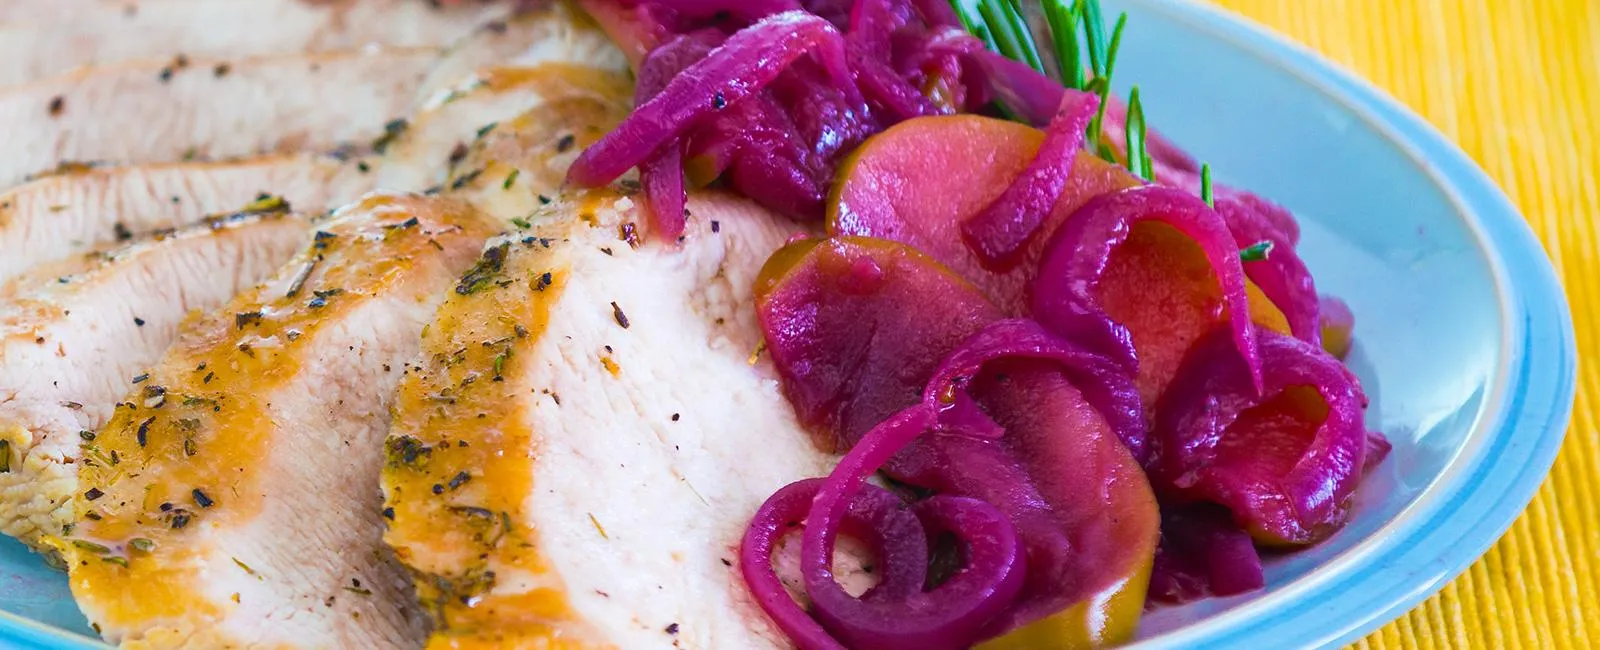 Roasted Turkey Tenderloin with Apple Compote 